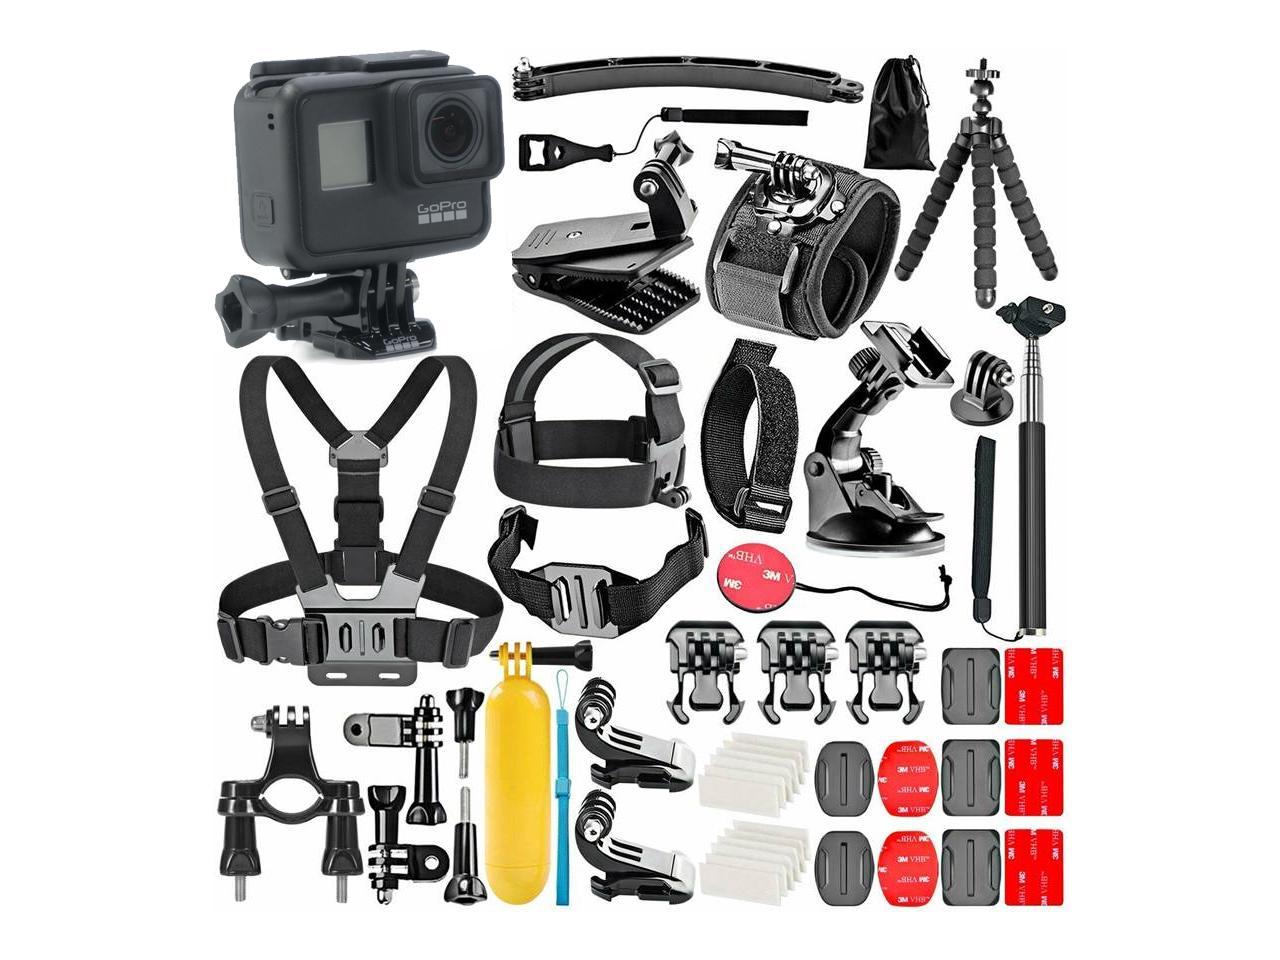 GoPro Hero 7 Black with 50 Piece Action Accessory Kit | Straps | Harnesses | Mounts | Adapters in One Bundle